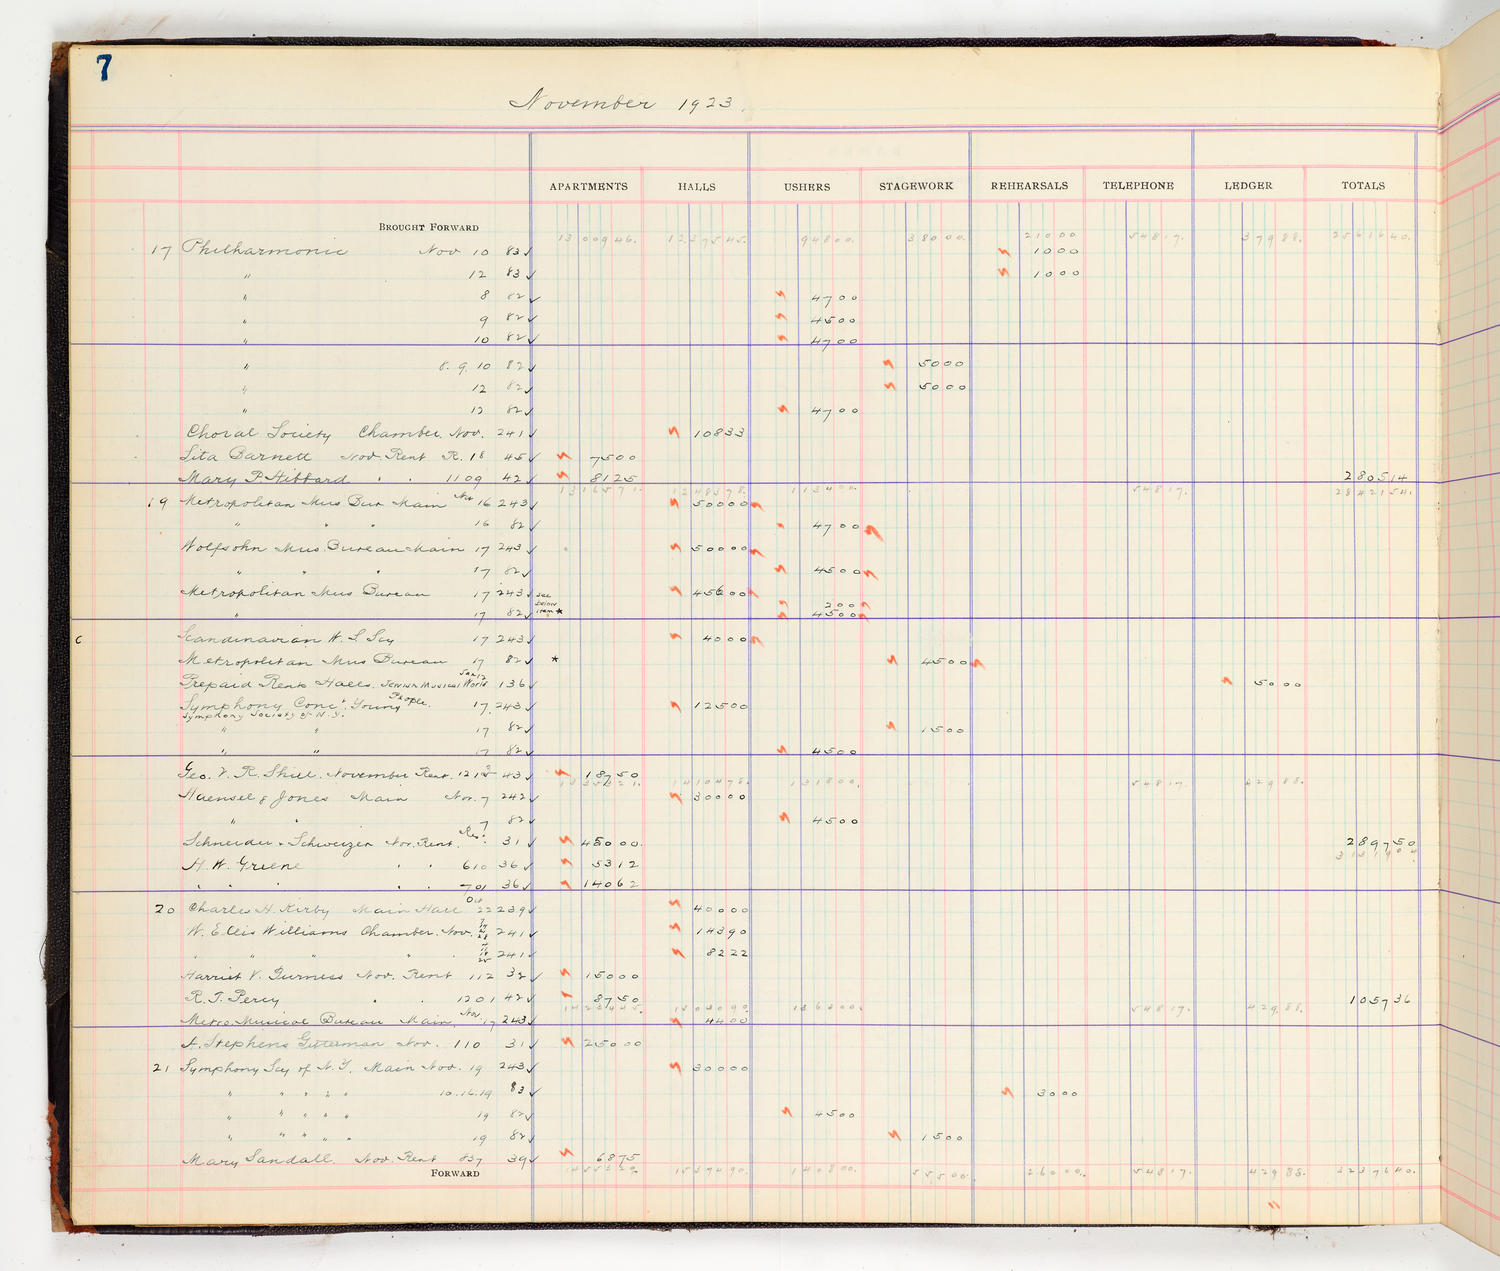 Music Hall Accounting Ledger Cash Book, volume 8, page 7a